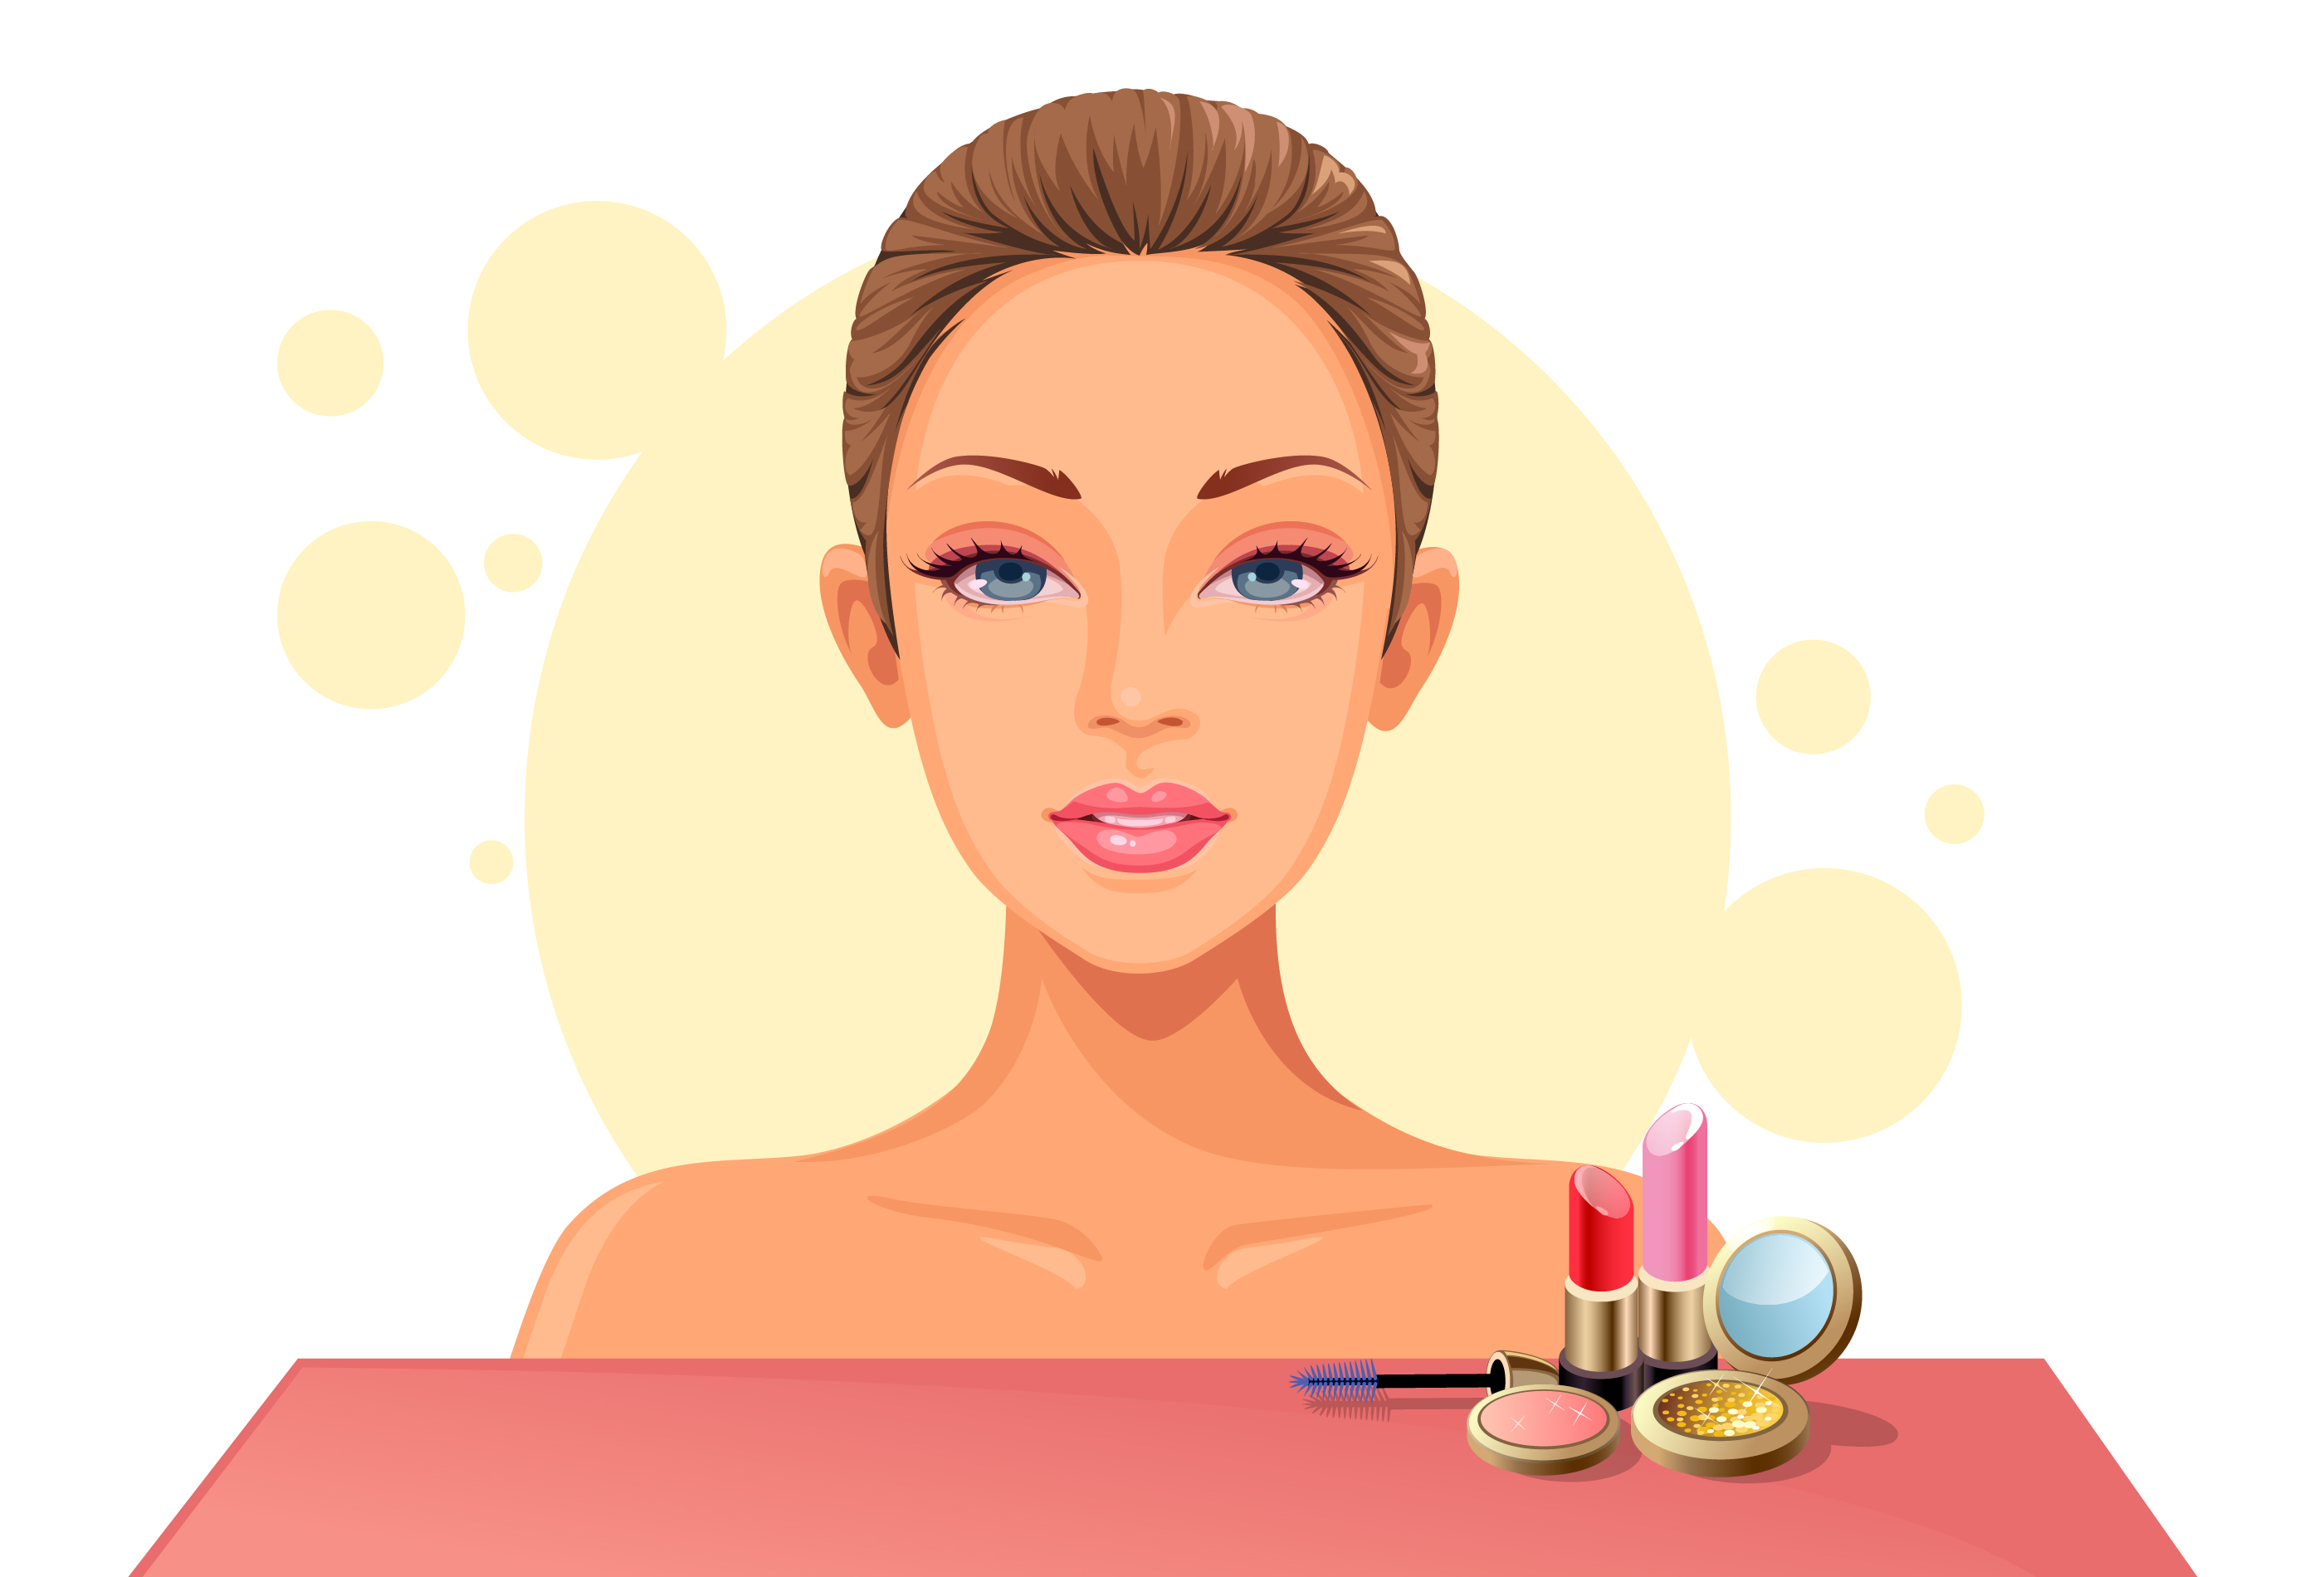 Download Woman face with makeup kit 1265653 - Download Free Vectors ...